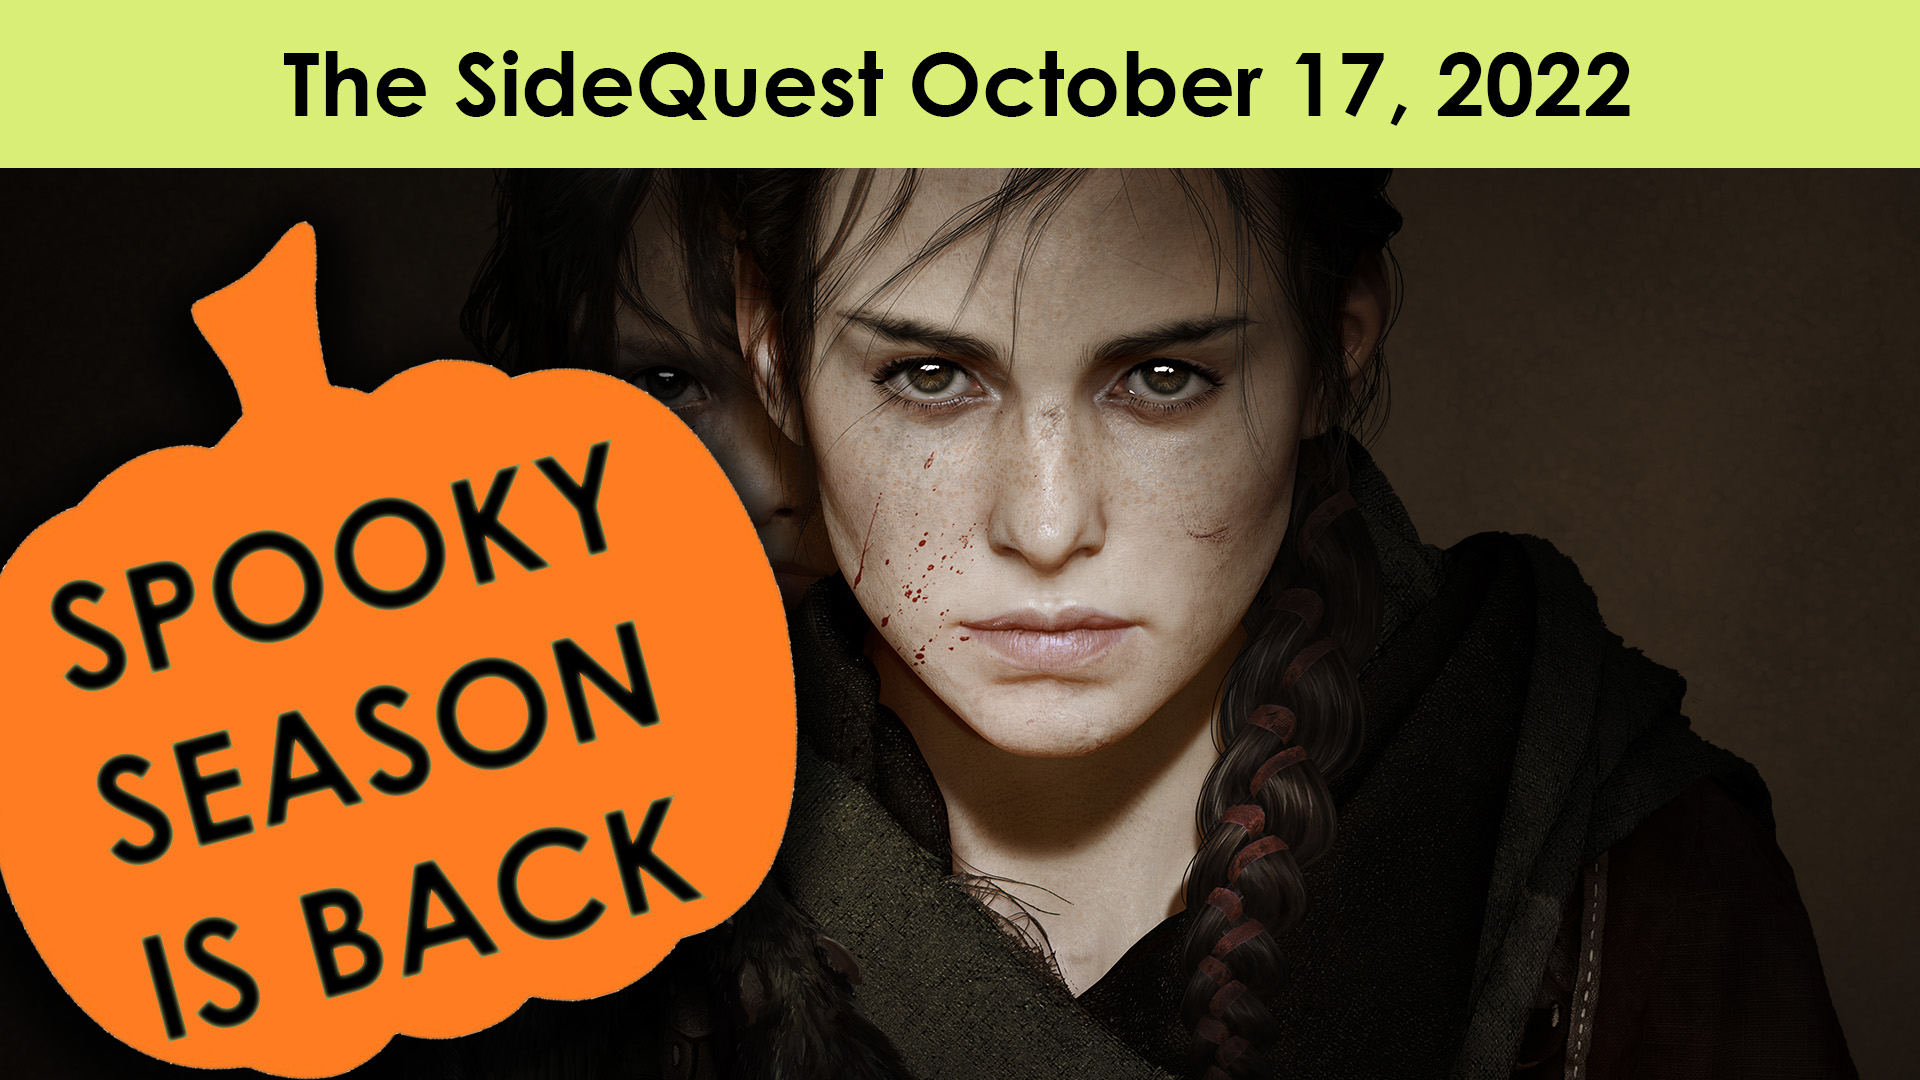 The SideQuest October 17, 2022: Spooky Season is Back